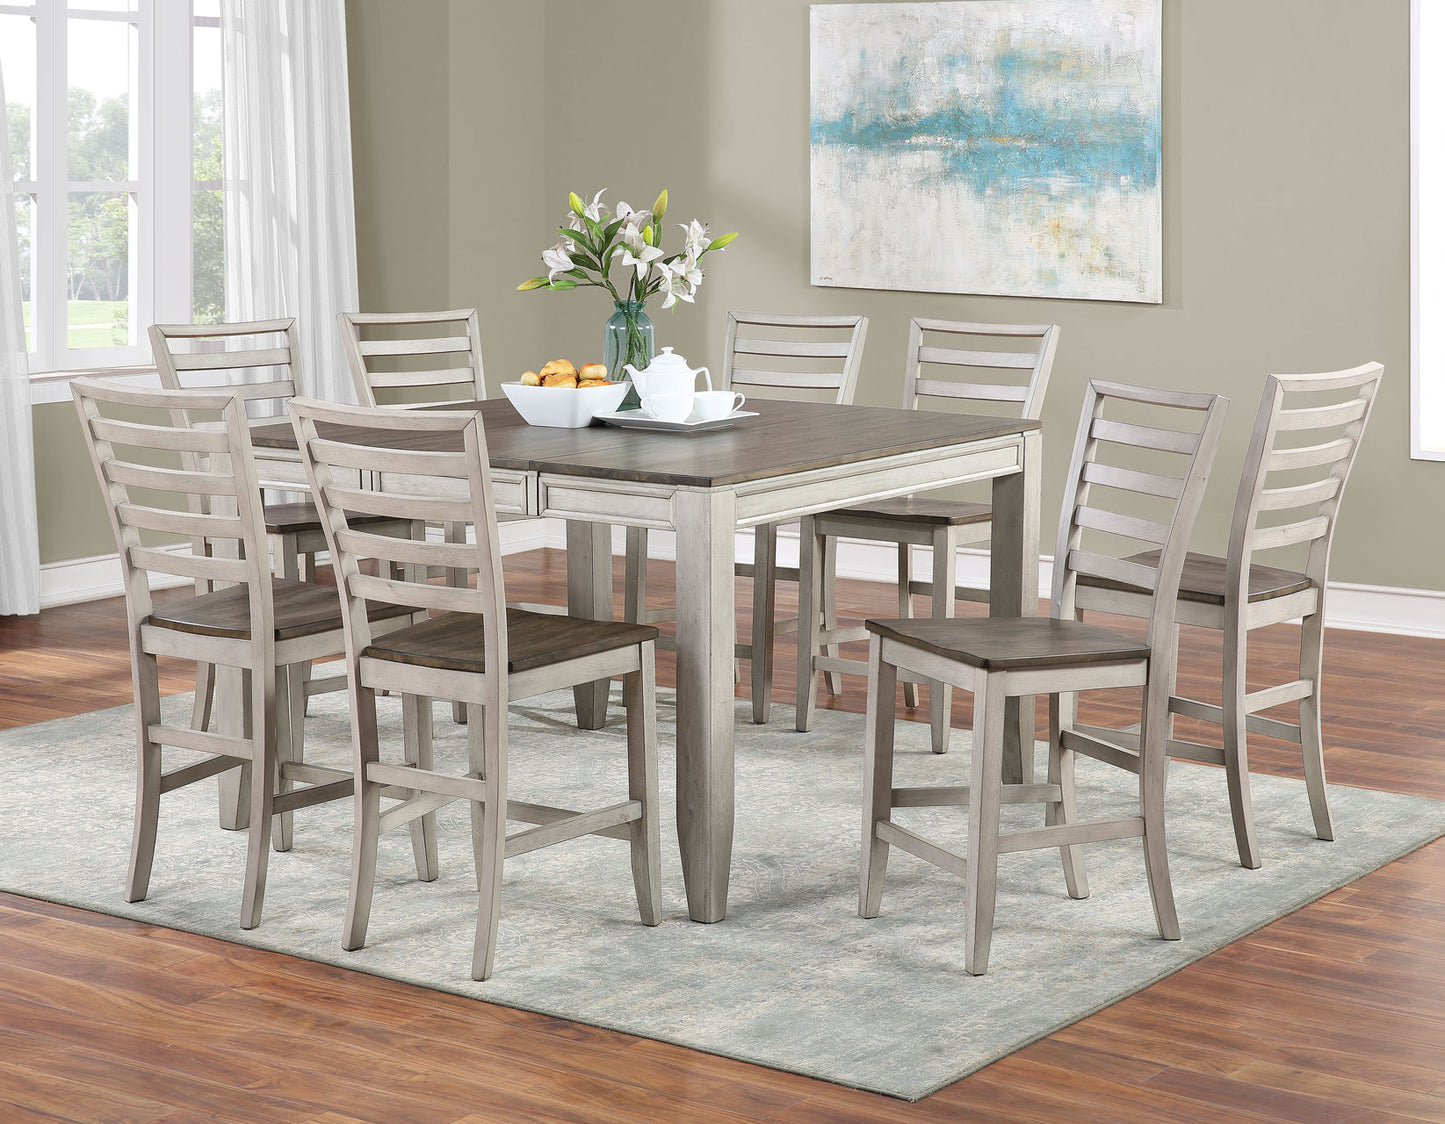 Abacus 5-Piece Counter Dining Set
(Counter Table & 4 Counter Chairs)